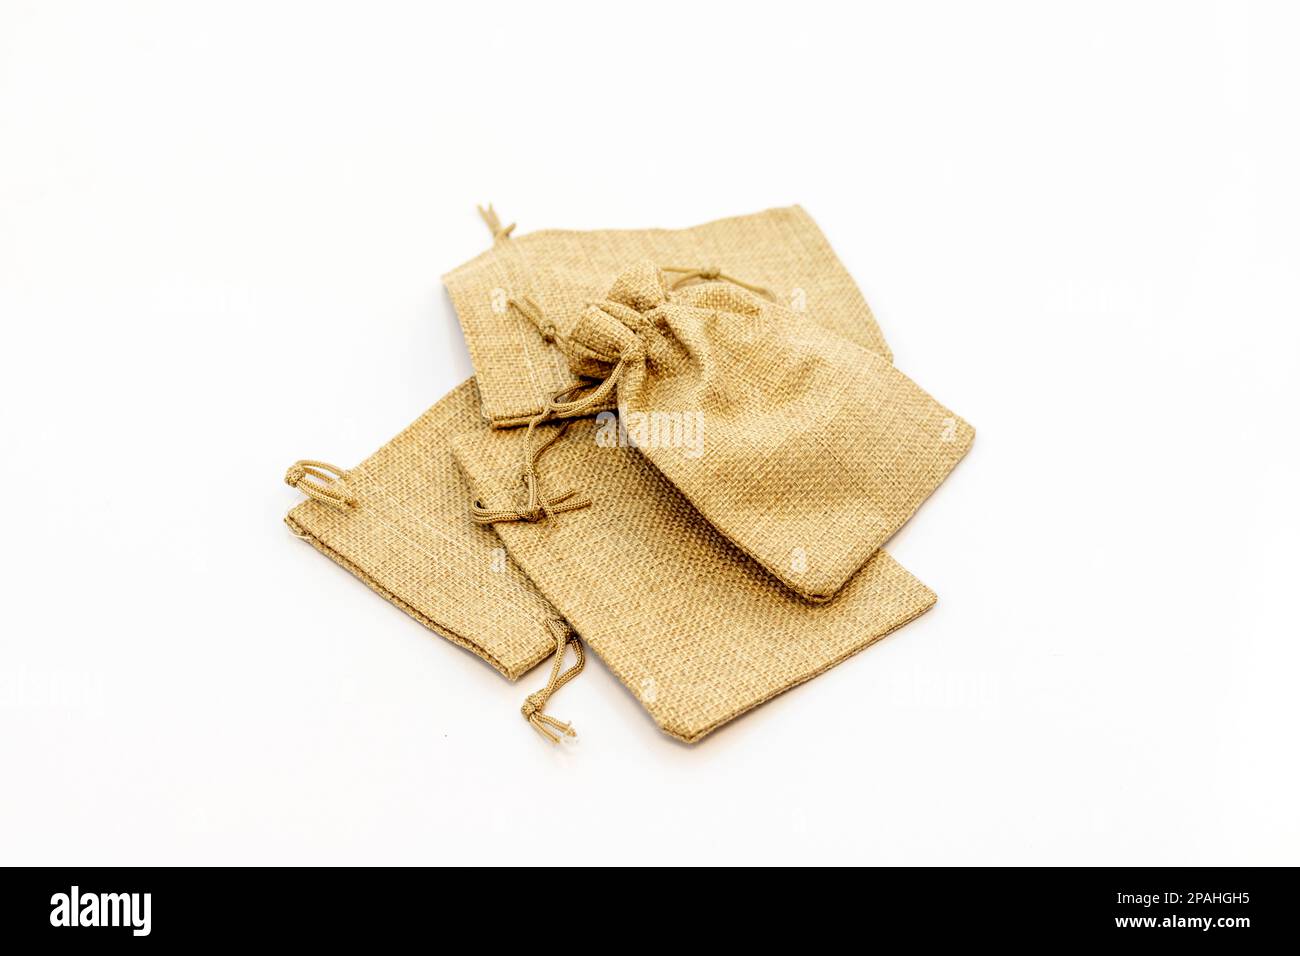 Jute sack bags for gifts isolated on white background. selective focus Stock Photo